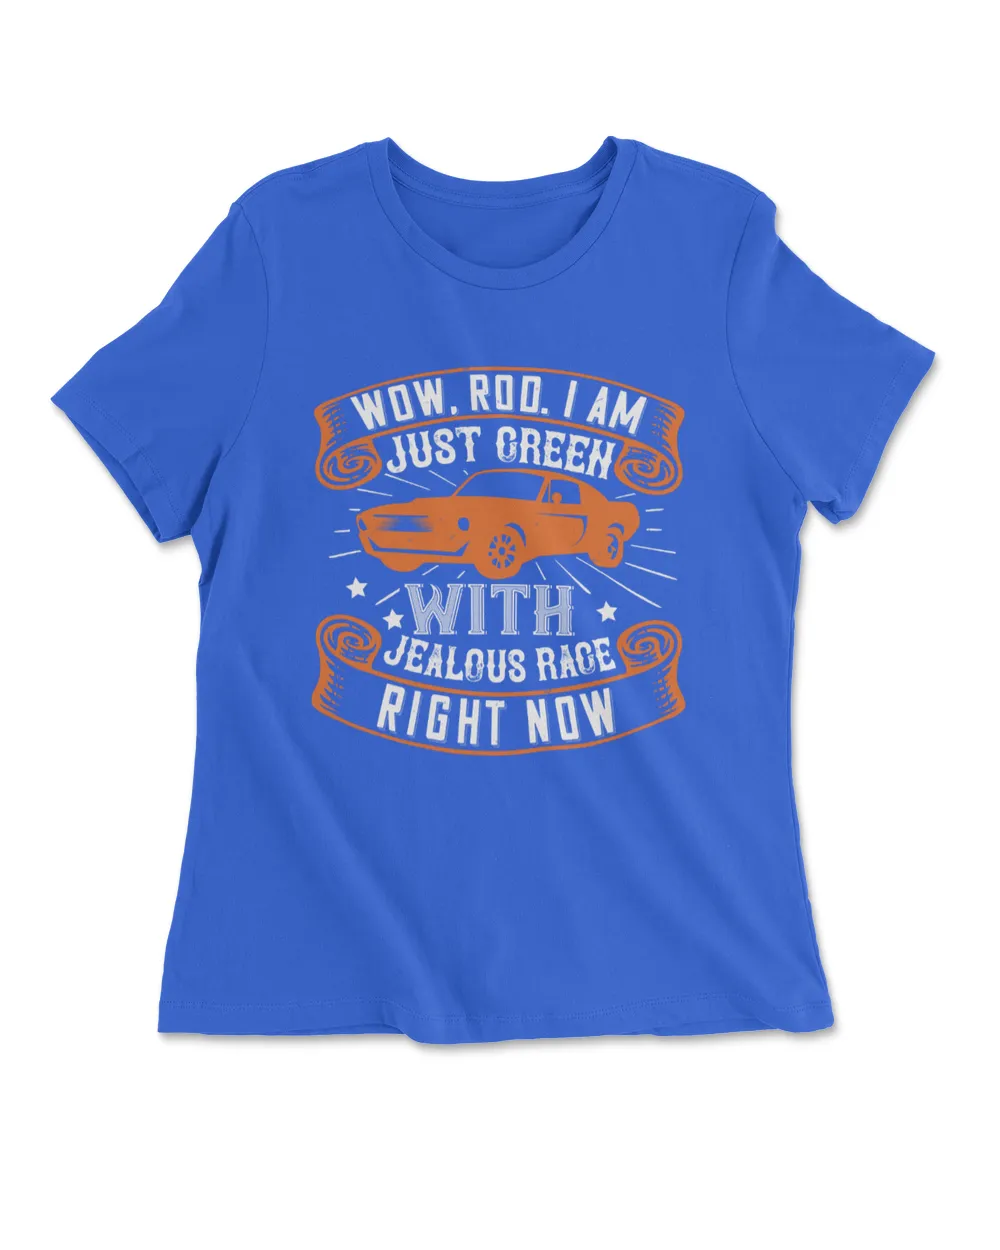 Wow Rod I Am Just Green With Jealous Rage Right Now Hot Rod T-Shirt